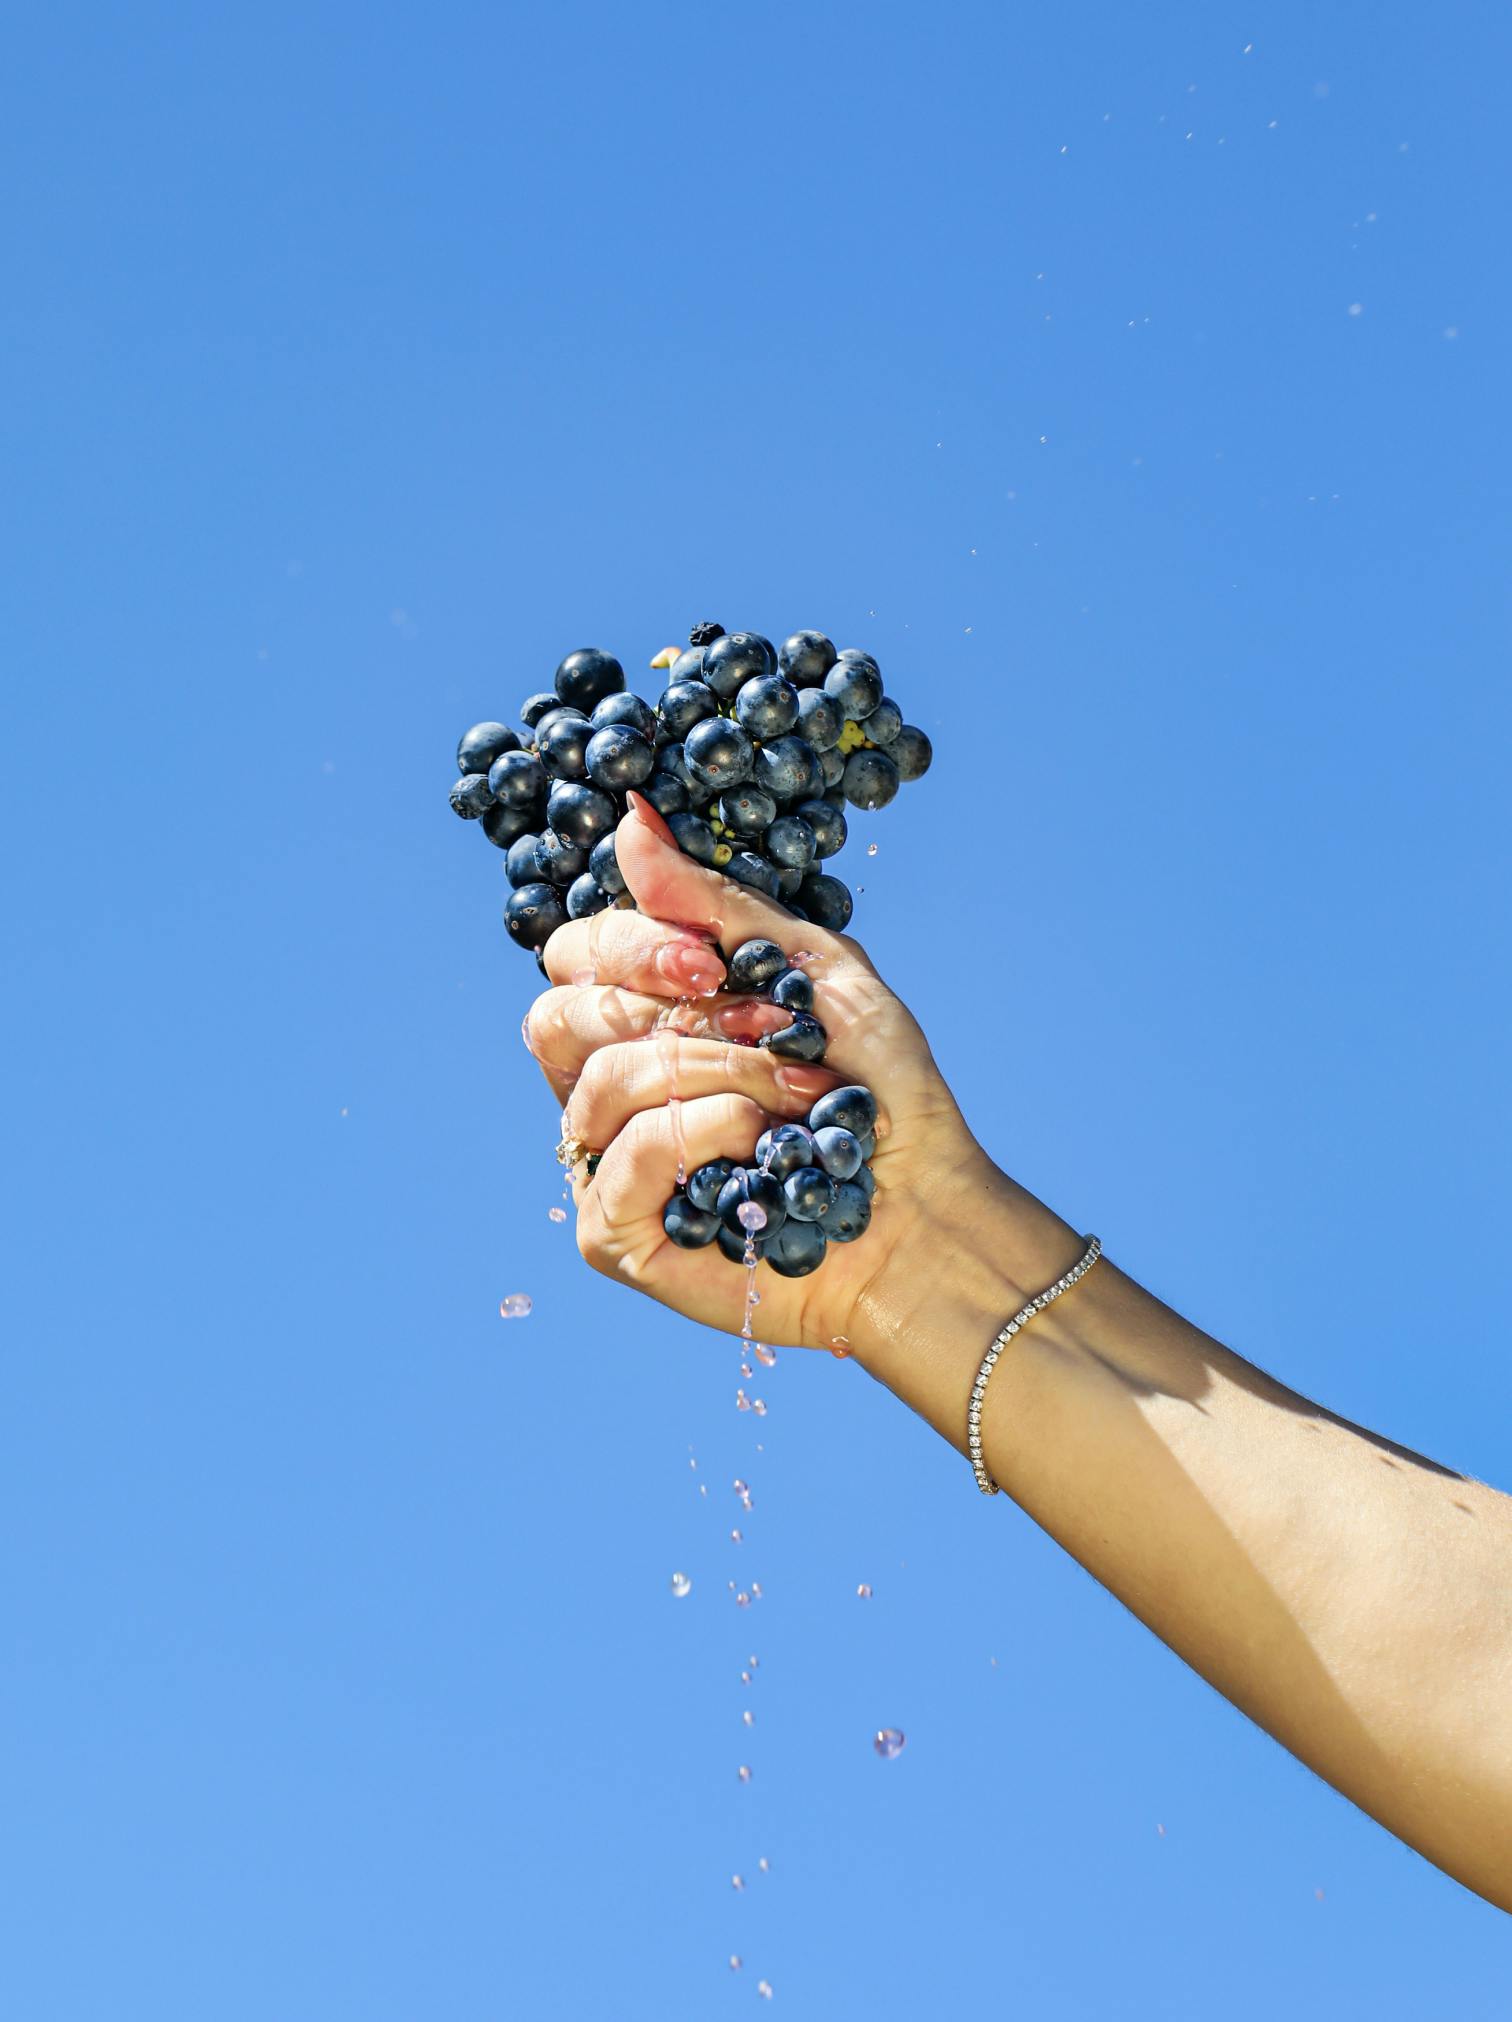 Background Image of Grapes being squeezed